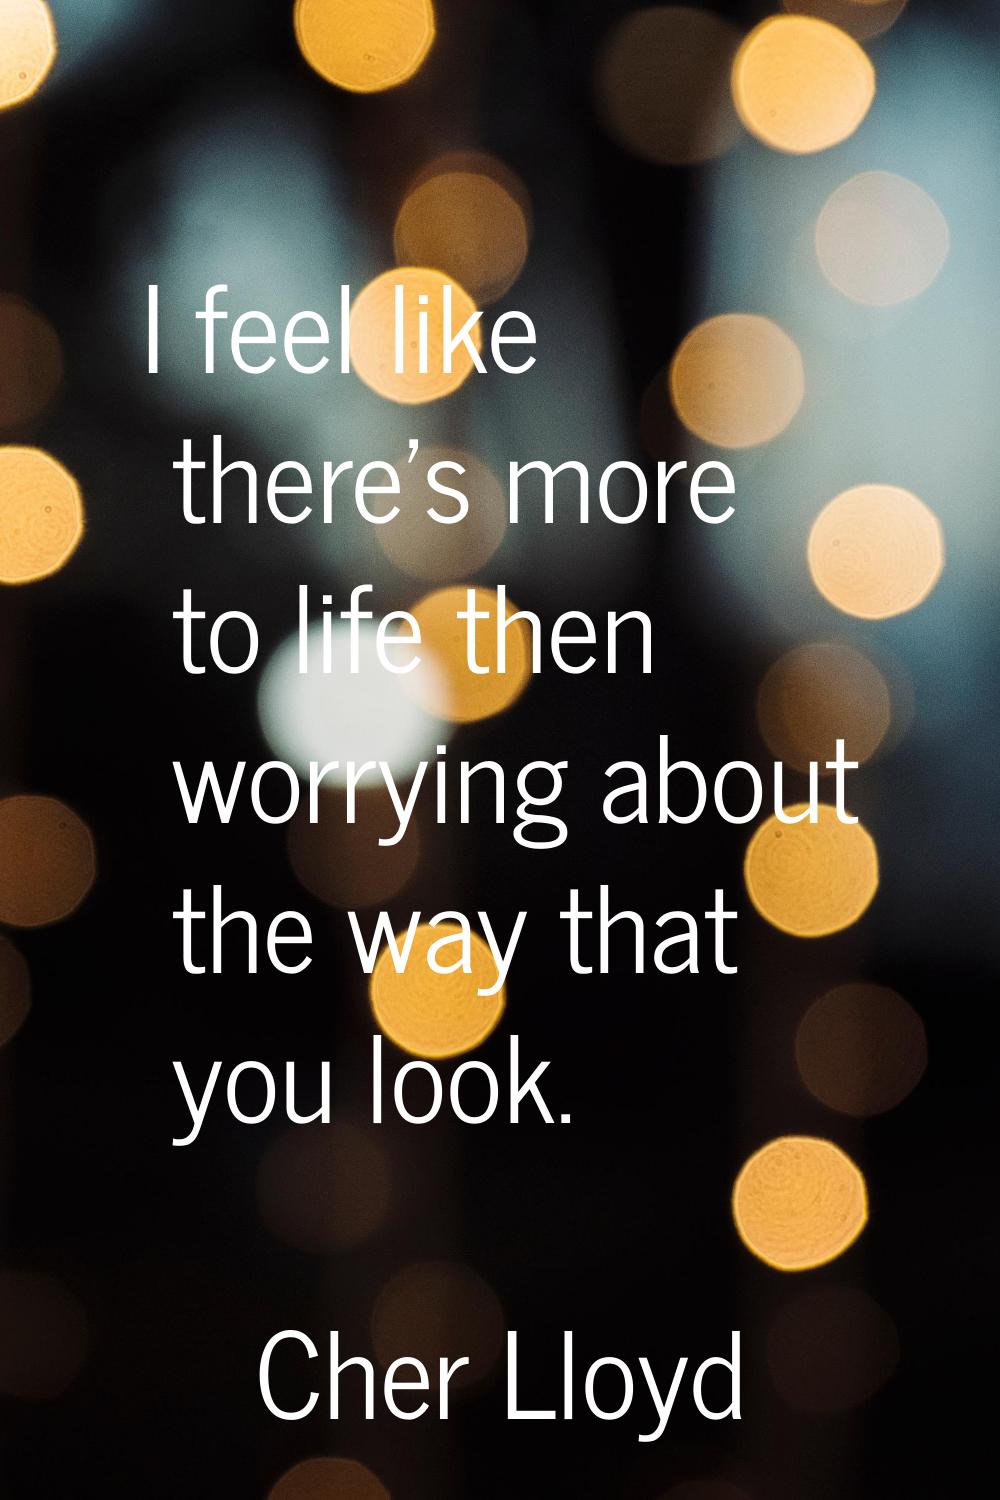 I feel like there's more to life then worrying about the way that you look.